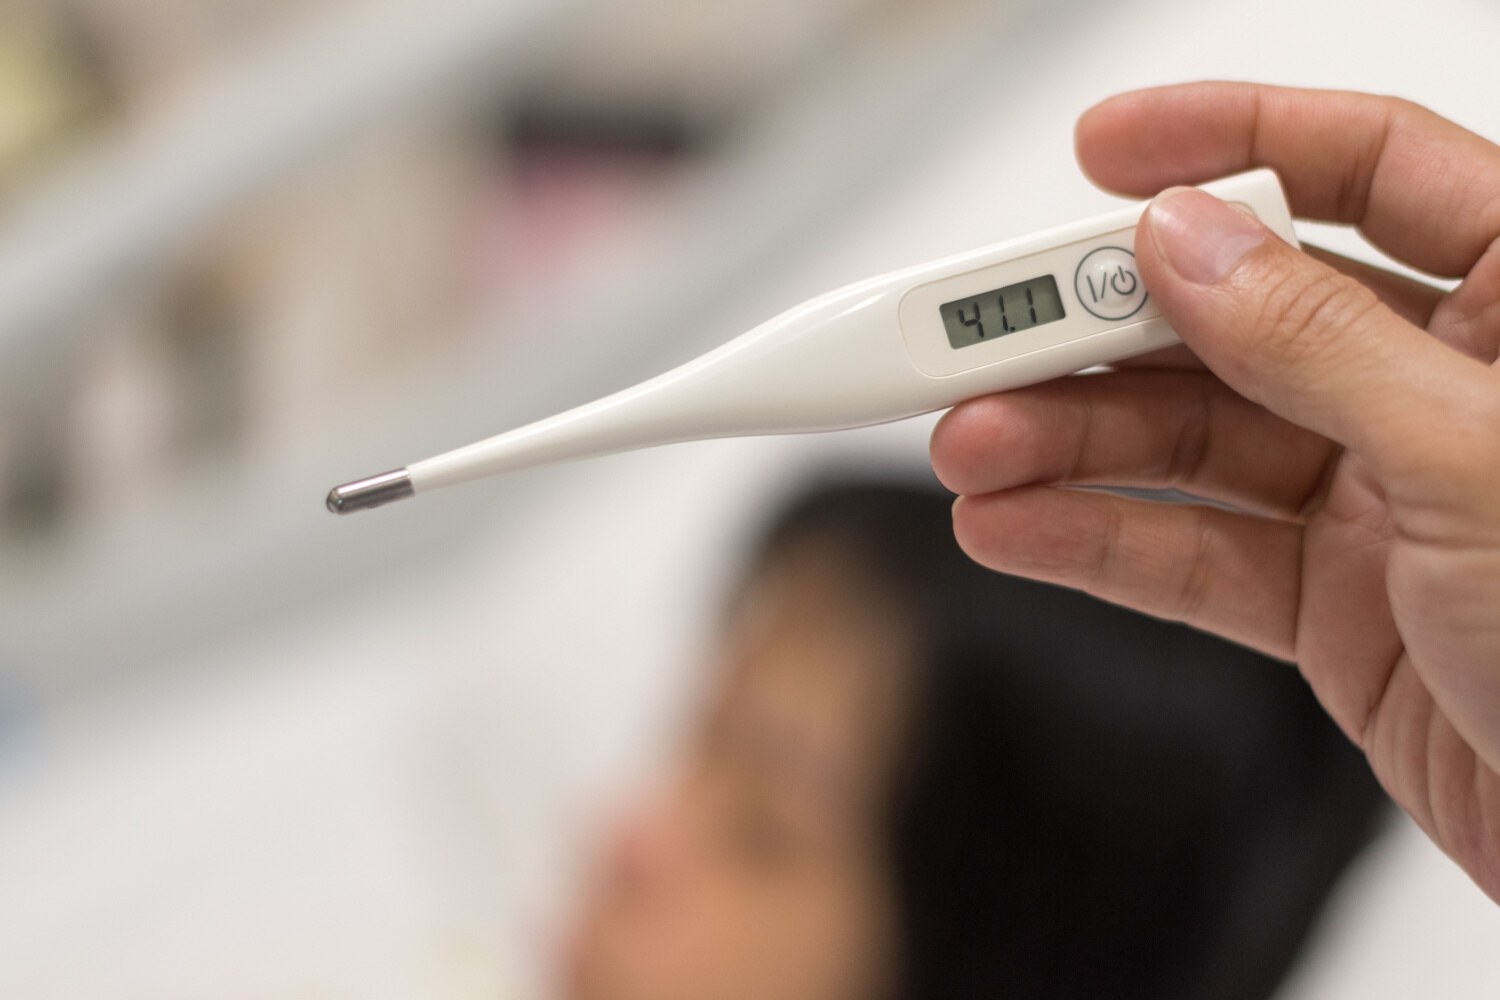 A fever exceeding 100.4 degrees can cause febrile seizures in toddlers